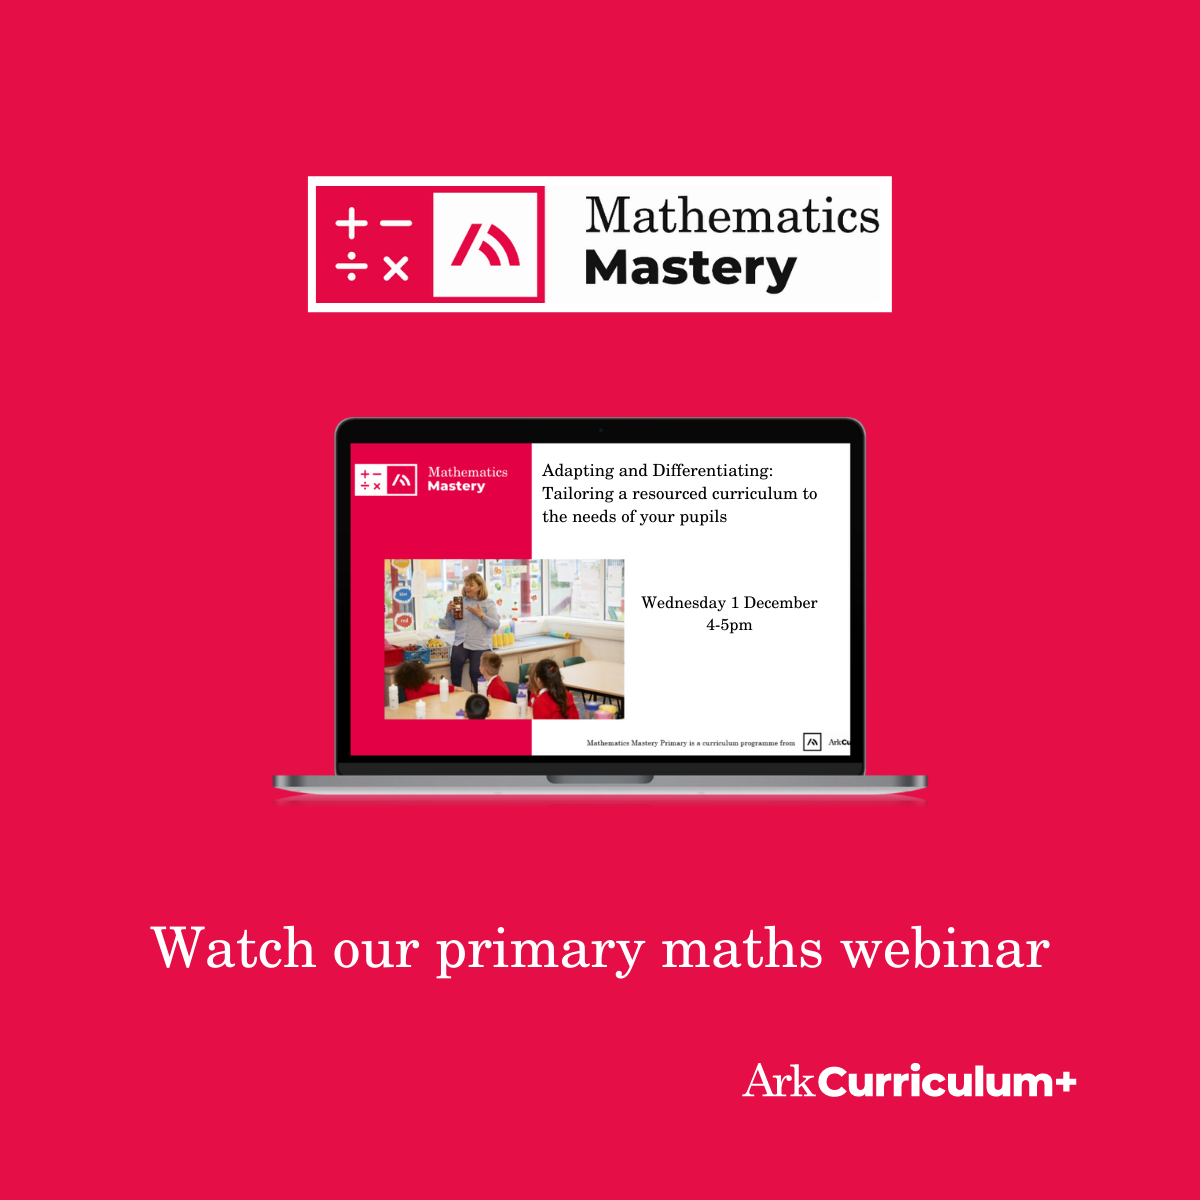 Watch our webinar: Adapting and Differentiating: Tailoring a resourced curriculum to the needs of your pupils